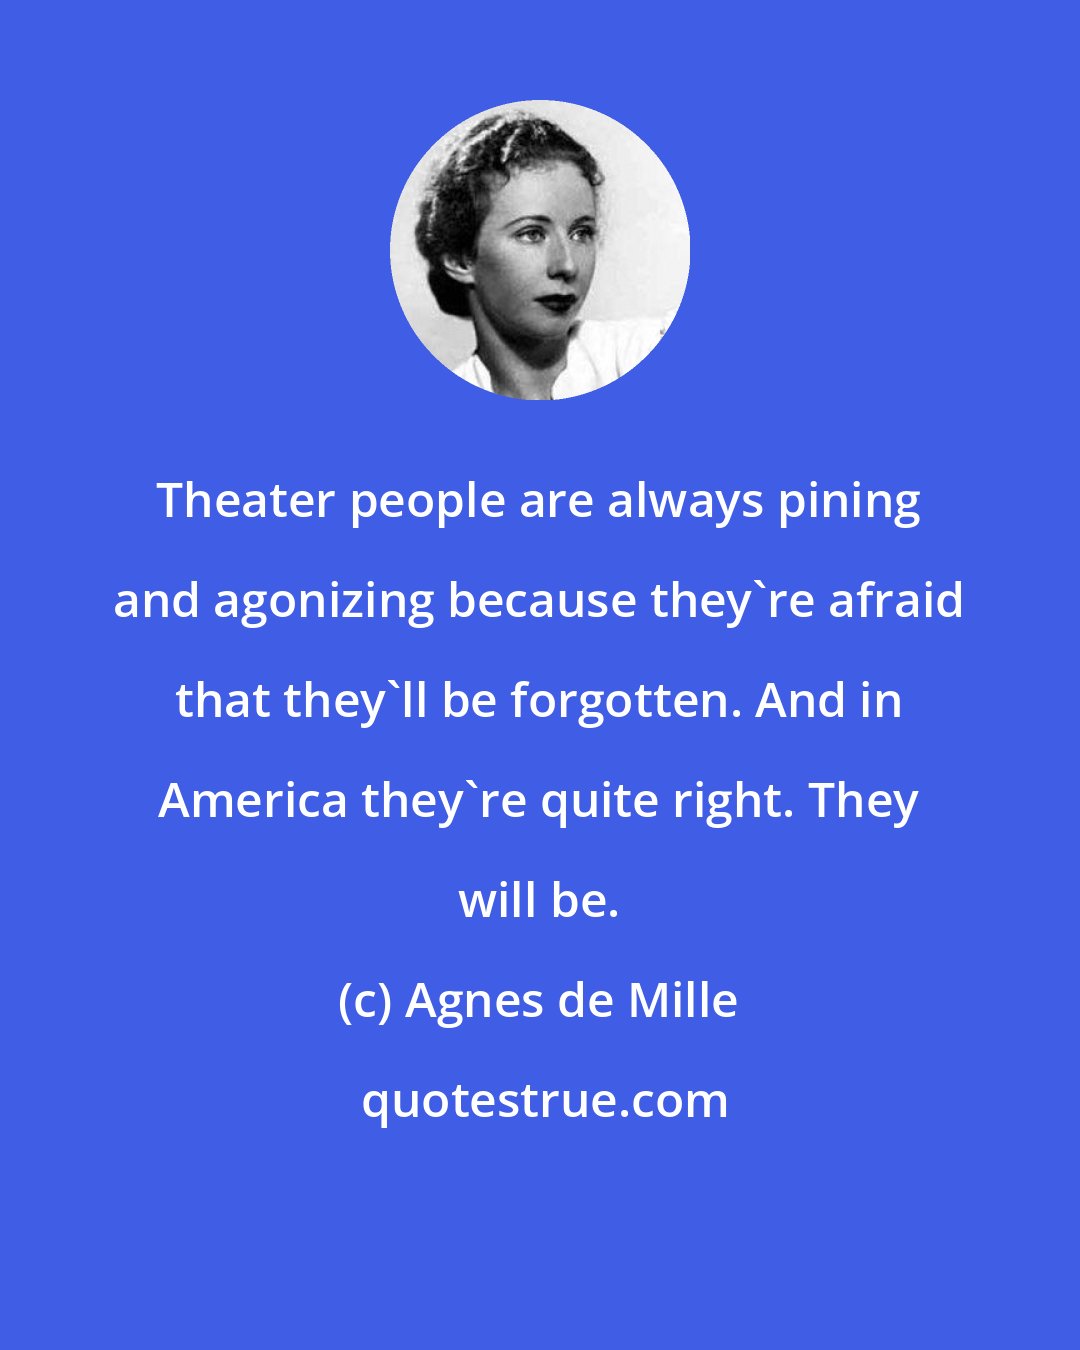 Agnes de Mille: Theater people are always pining and agonizing because they're afraid that they'll be forgotten. And in America they're quite right. They will be.